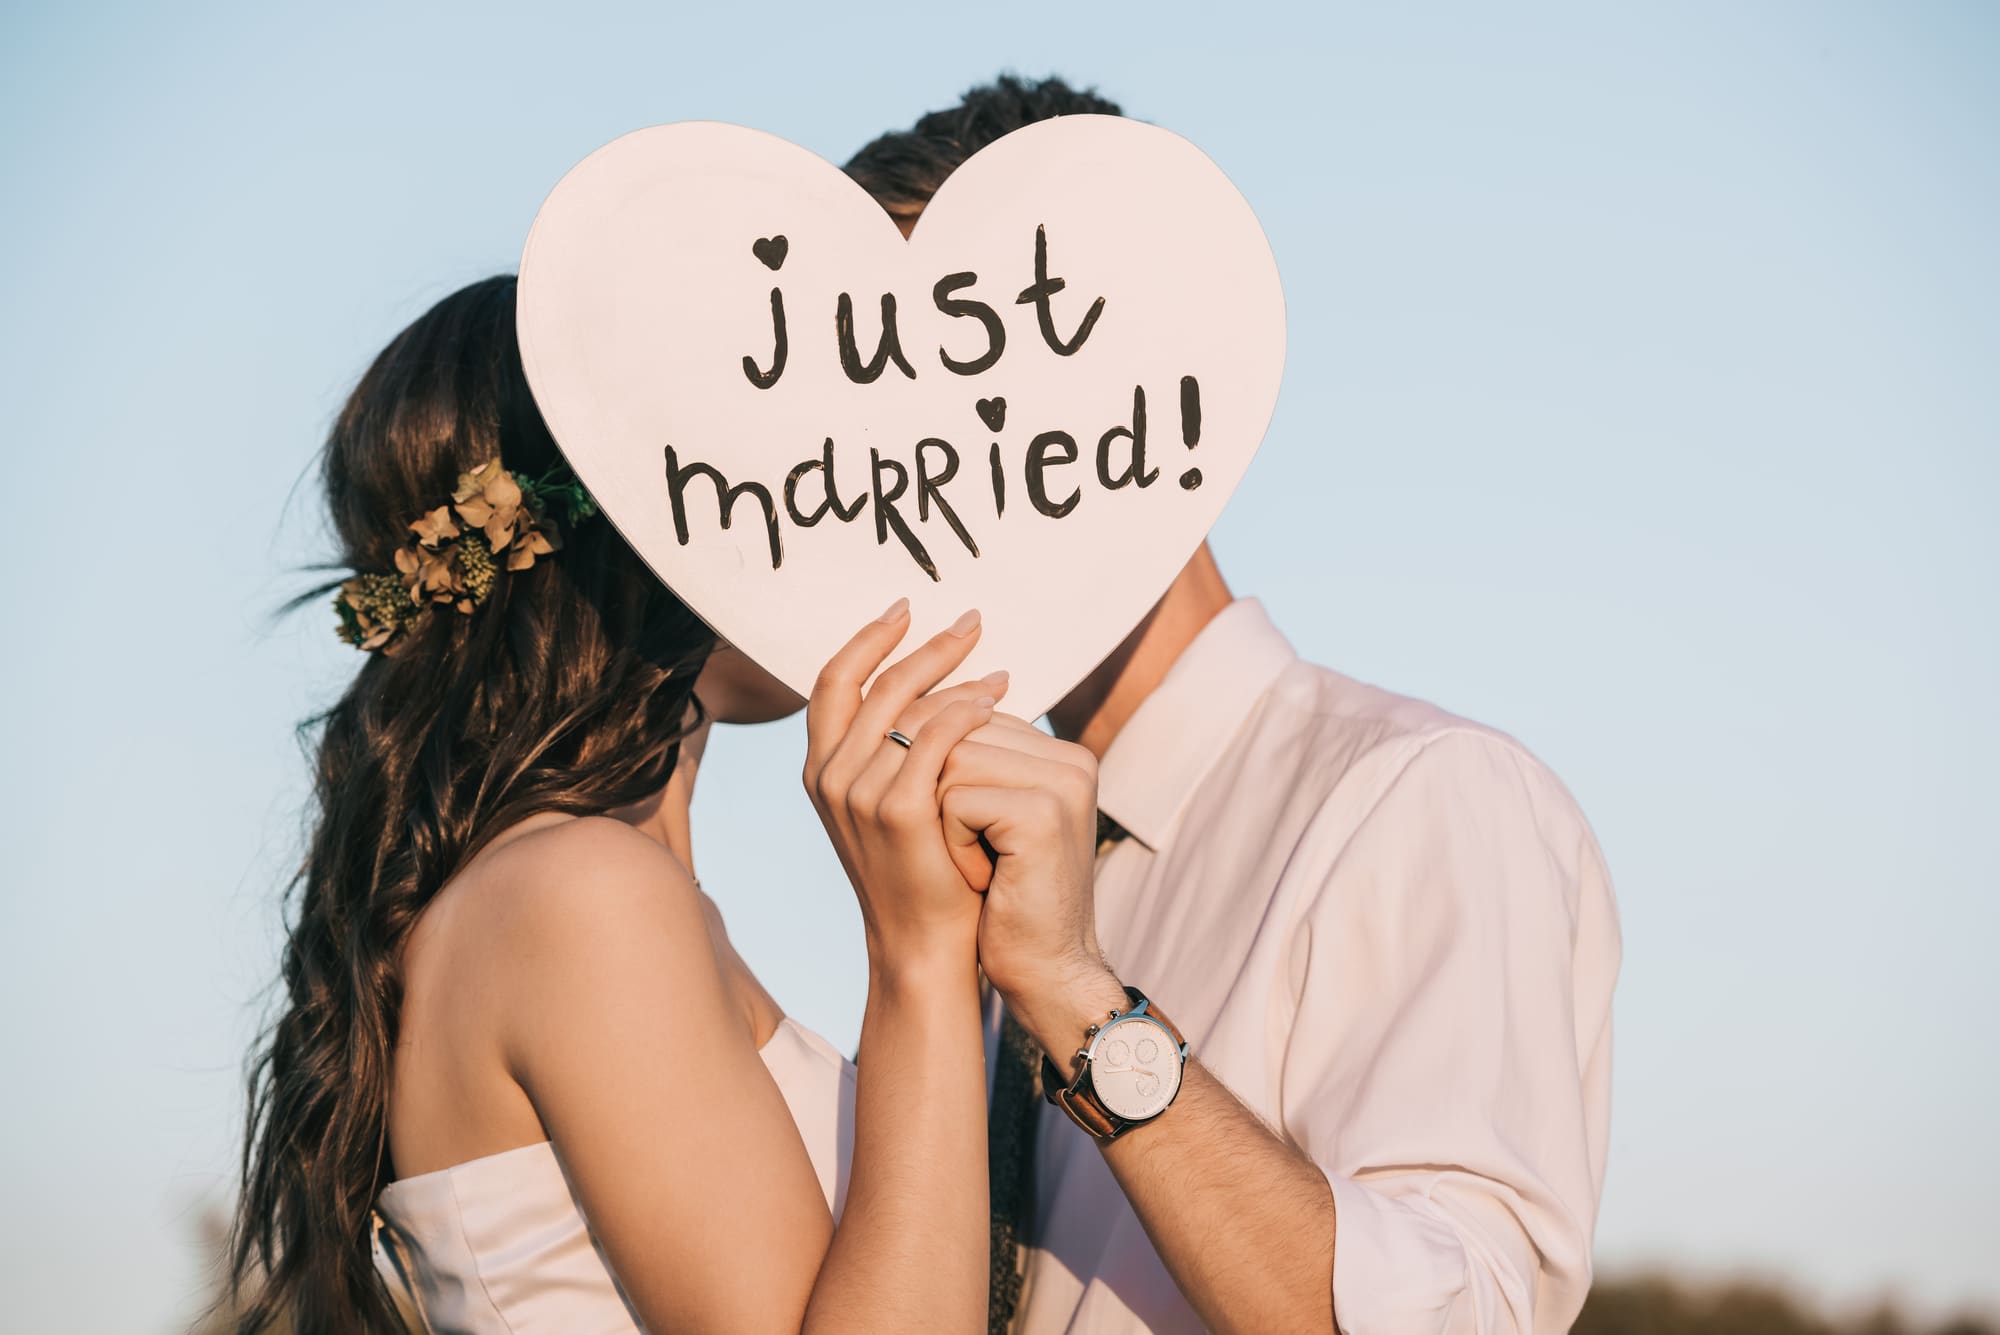 How To Use Numerology To Pick Your Perfect Wedding Date (And Which Days To Avoid!)